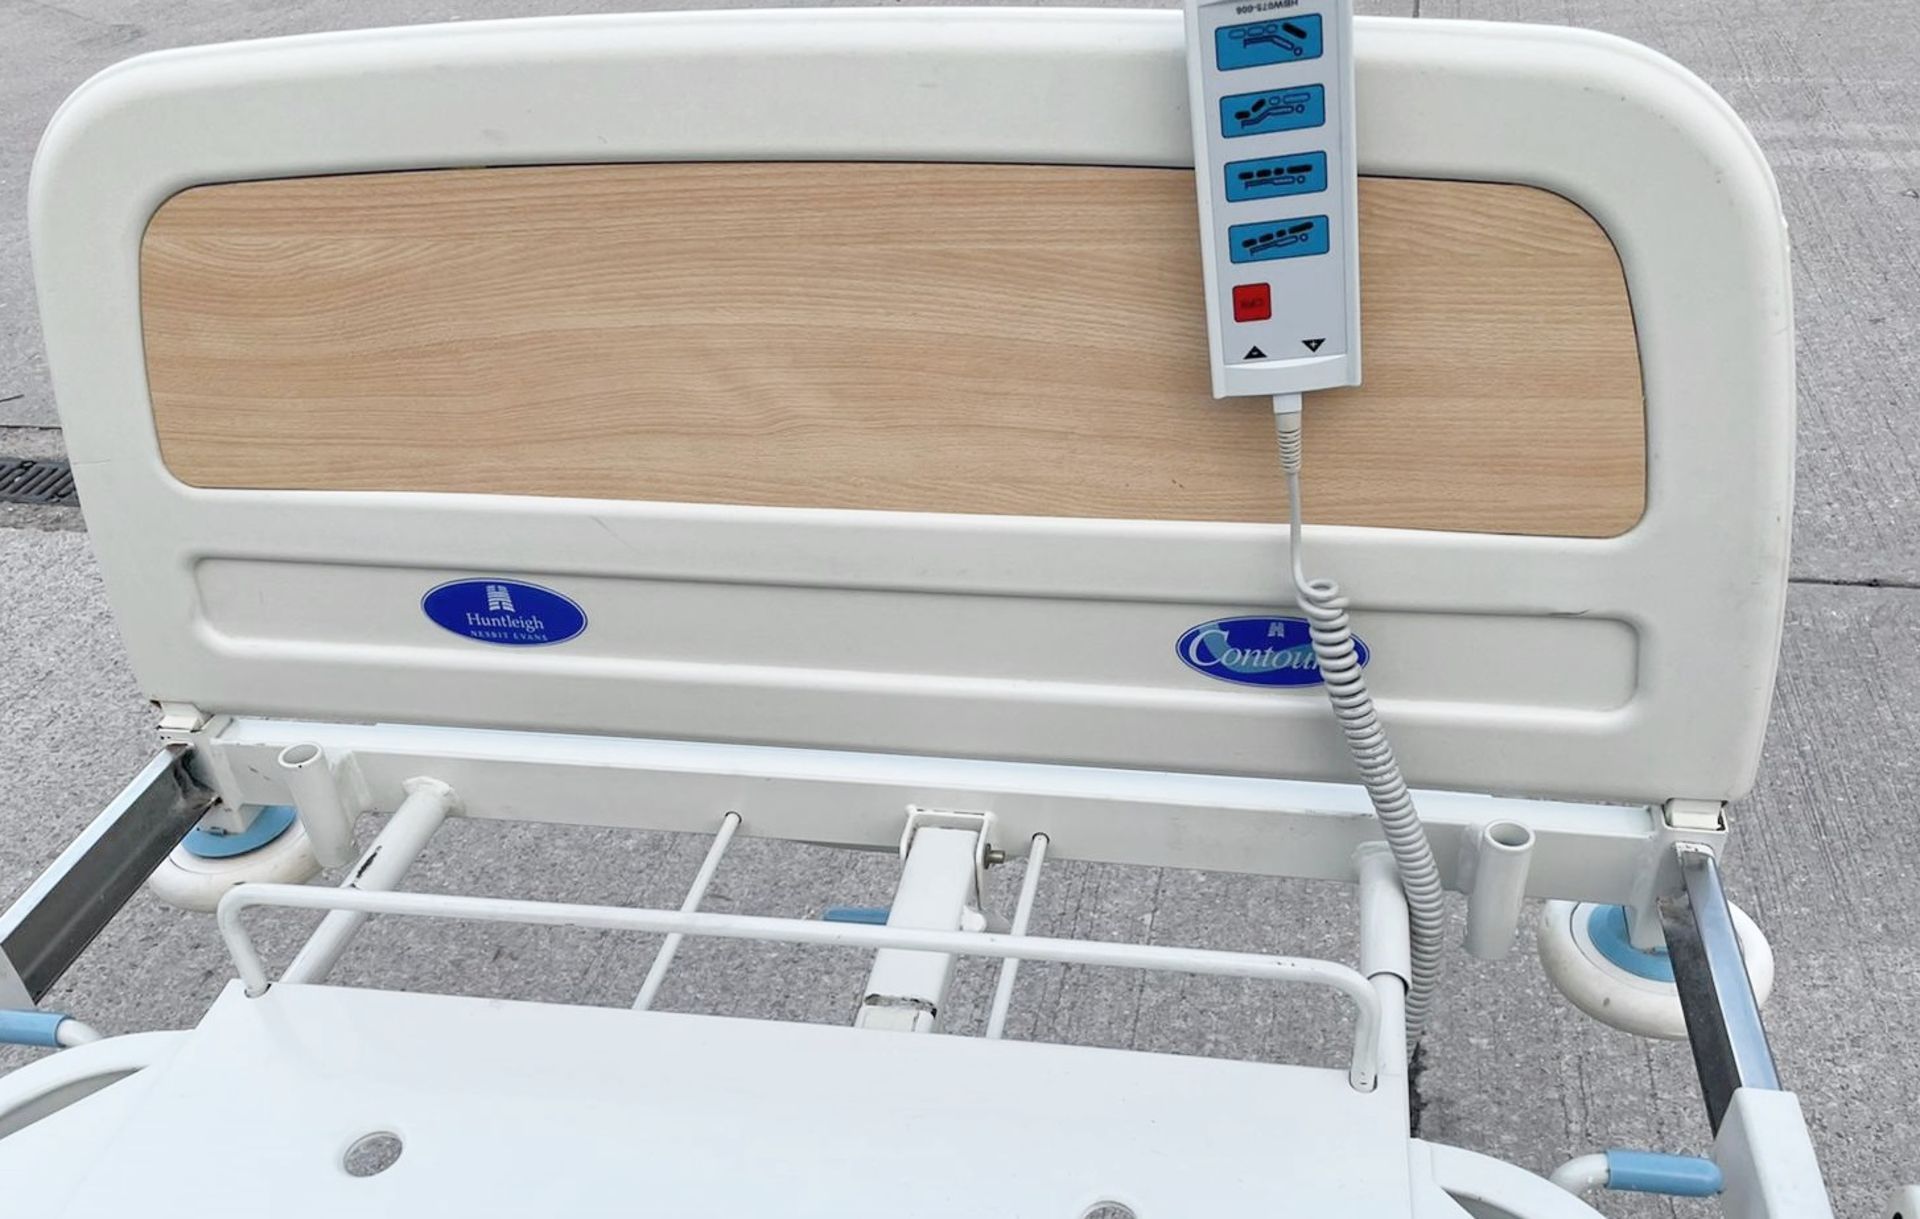 1 x Huntleigh CONTOURA Electric Hospital Bed - Features Rise/Fall 3-Way Profiling, Side Rails, - Image 5 of 16